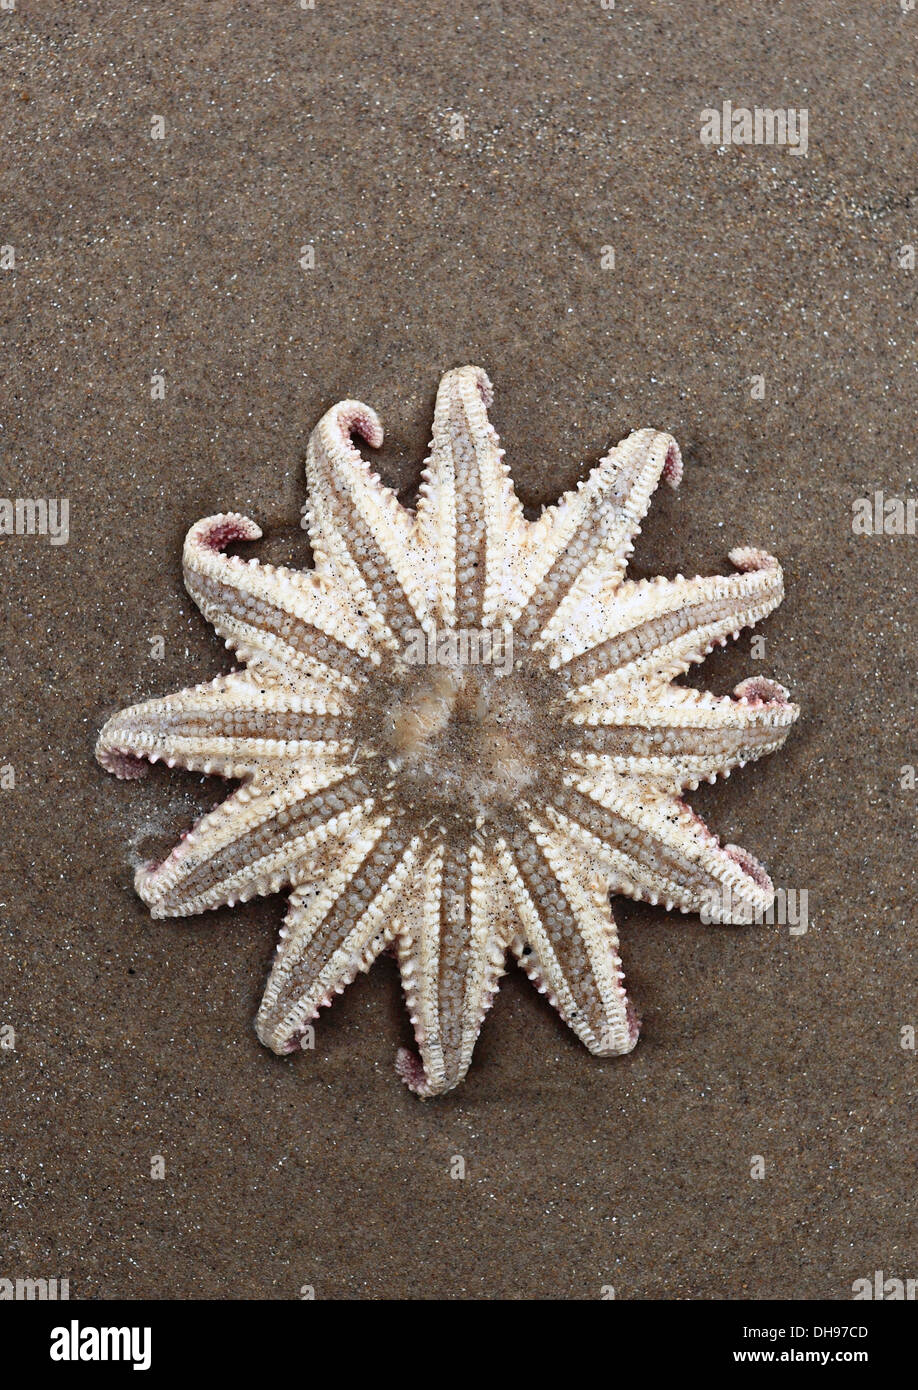 Starfish washed up on the sandy shore. Stock Photo